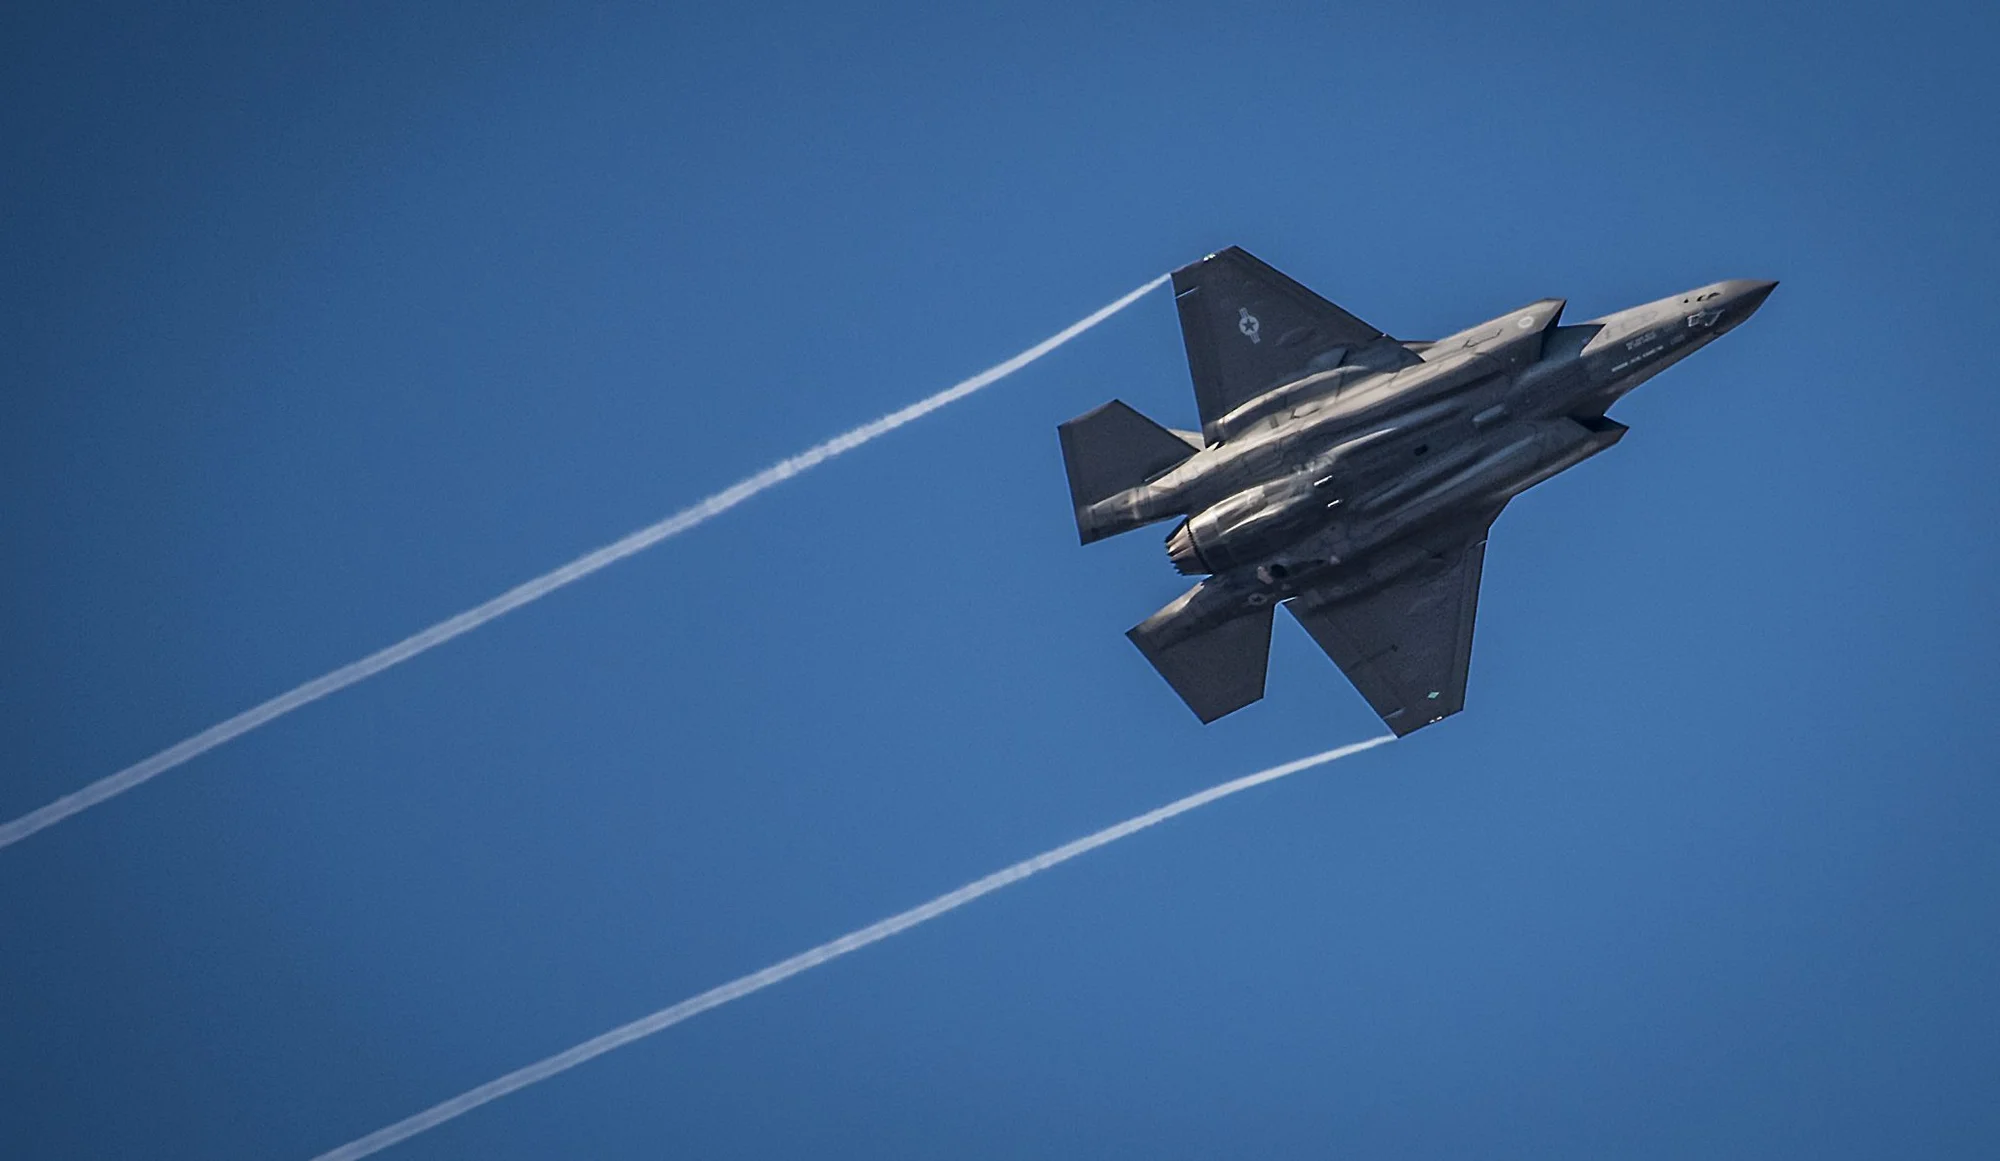 An F-35 Lightning II streaks across the sky while doing maneuvers to the Eglin Air Force Base runway. The 33rd Fighter Wing-owned aircraft is a fifth-generation fighter and used to train pilots and maintainers. US Air Force photo by Samuel King Jr.